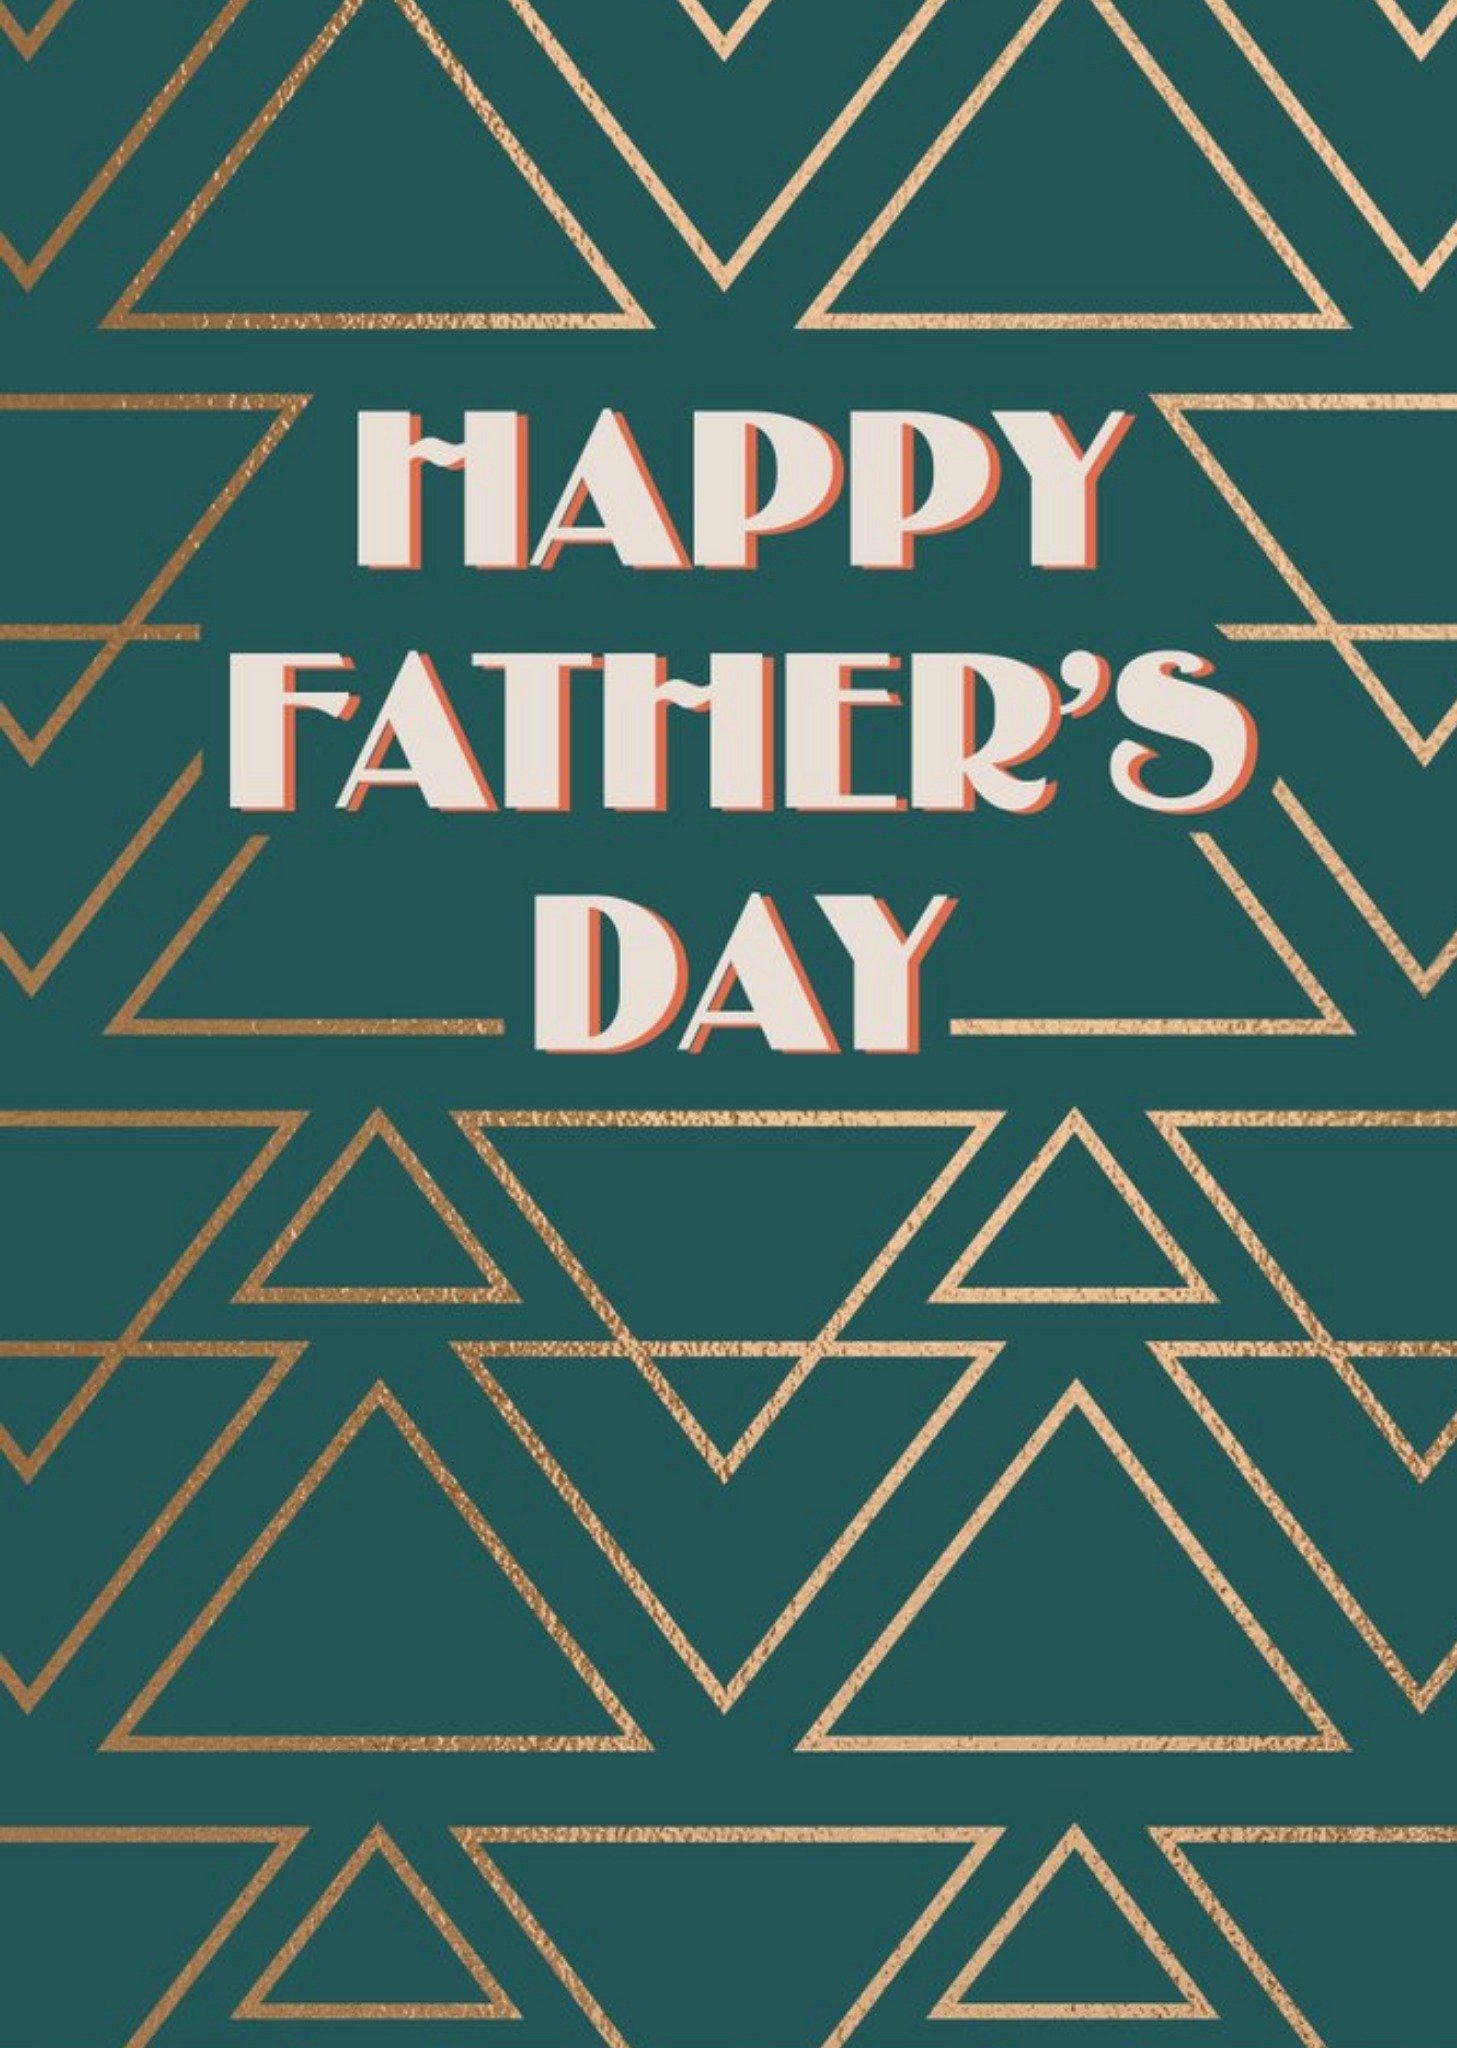 Moonpig Art Deco Gold Pattern Happy Father's Day Card Ecard